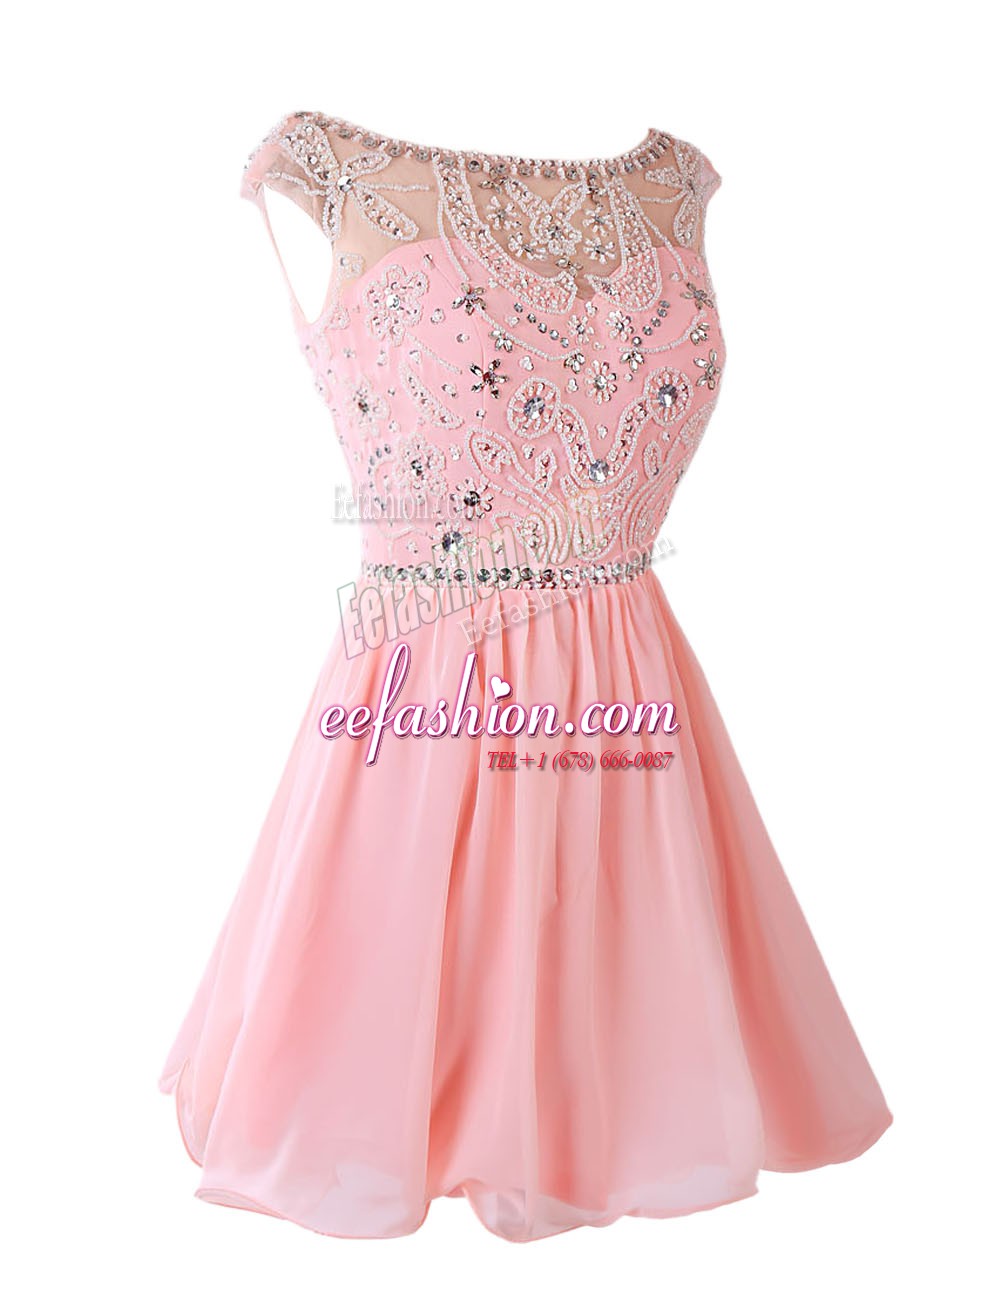  Pink Dress for Prom For with Sashes ribbons Bateau Sleeveless Zipper